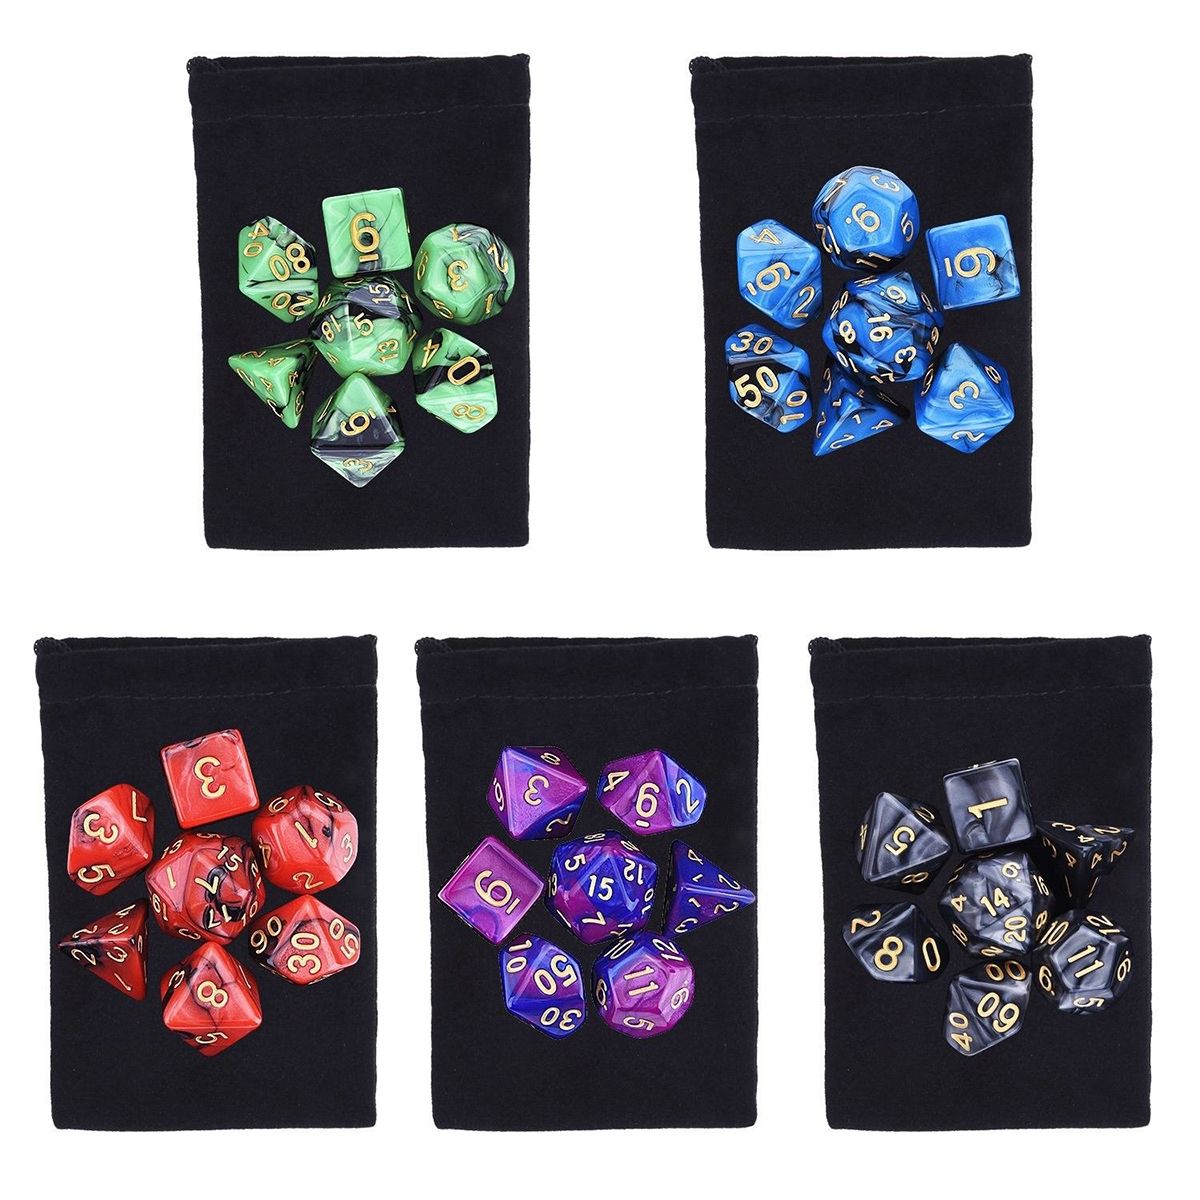 35Pcs-Polyhedral-Dice-Set-Multisided-Dices-Swirl-RPG-Role-Playing-Games-Gadget-W-bag-1259840